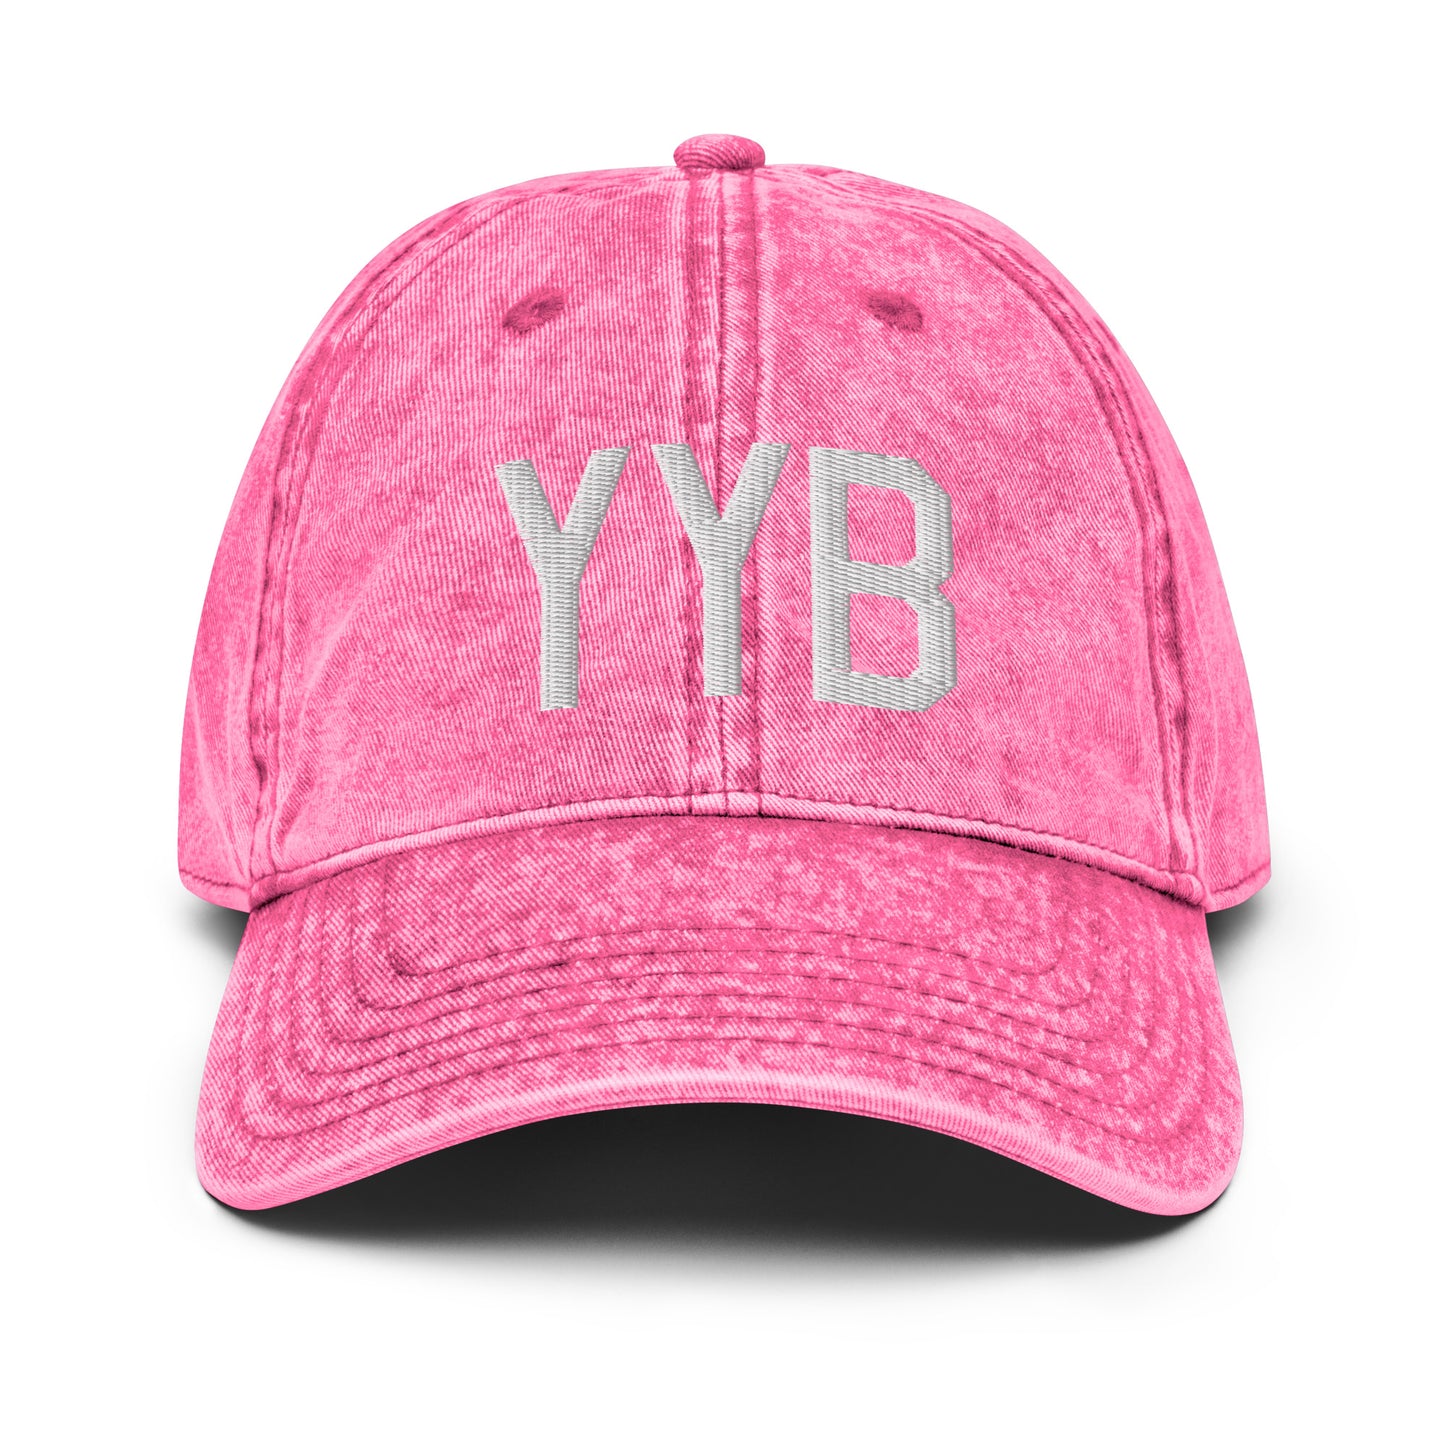 Airport Code Twill Cap - White • YYB North Bay • YHM Designs - Image 25